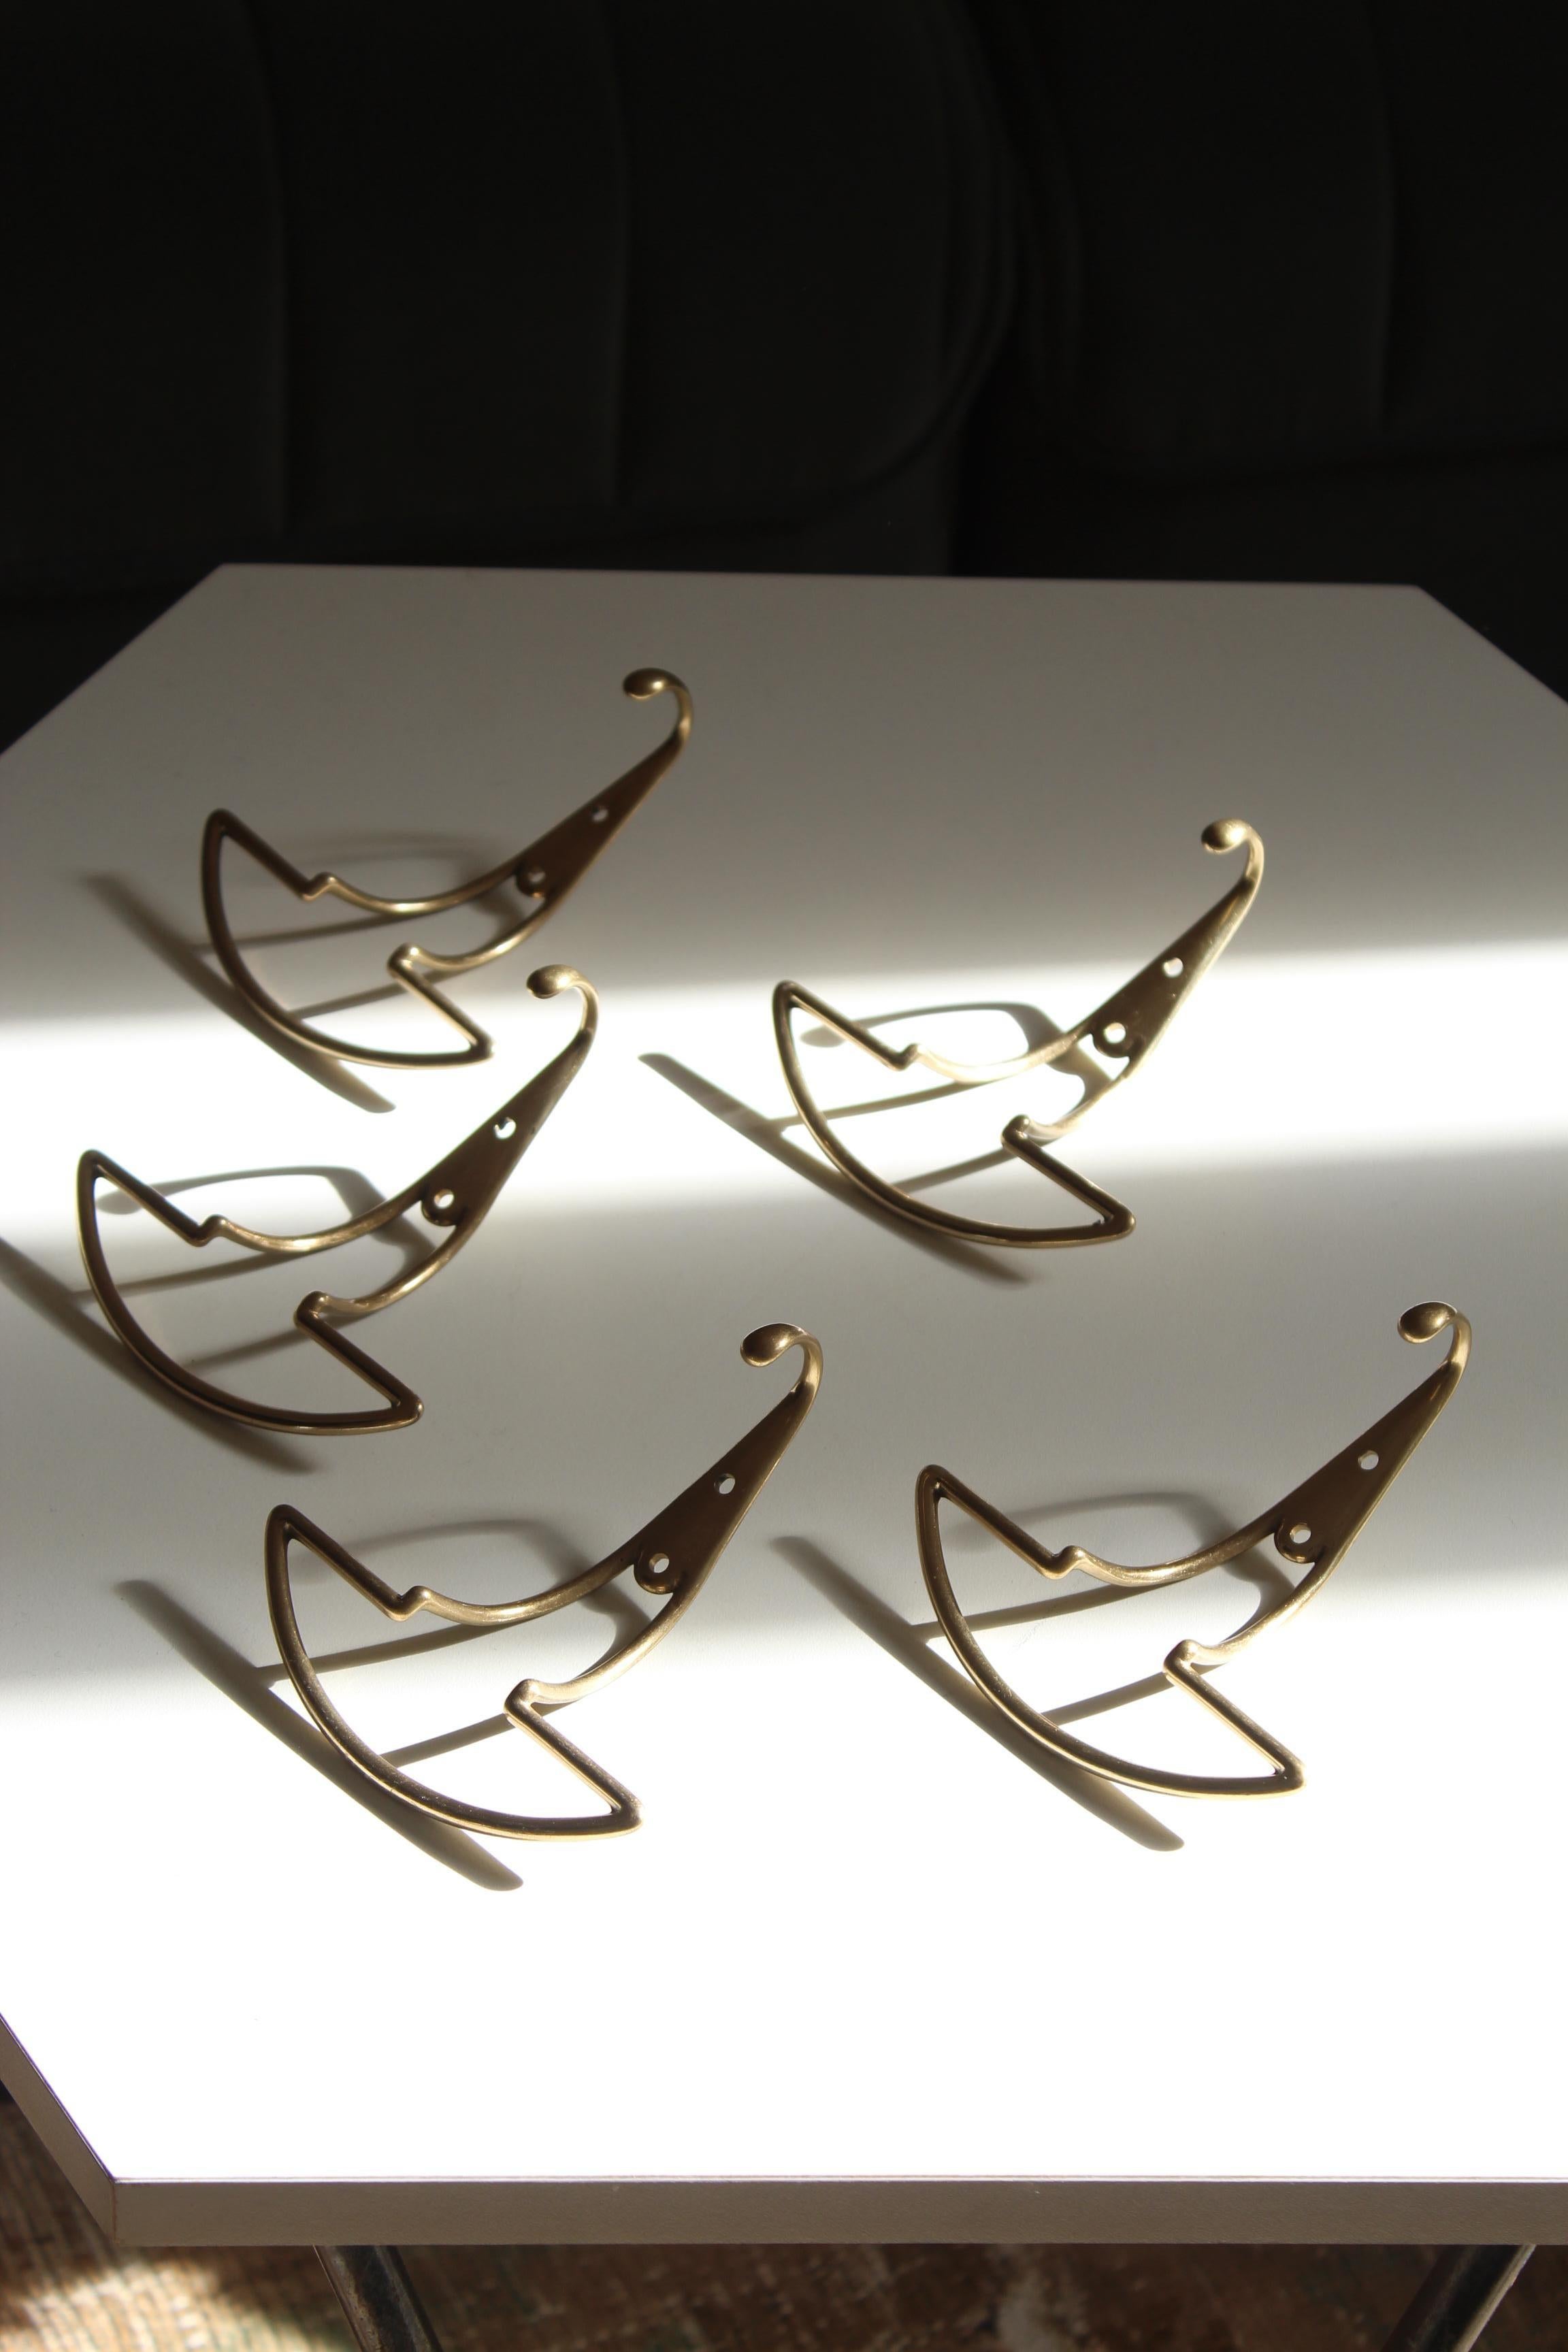 A set of 5 brass coat hangers, designed and produced by an Italian designer, Italy, 1940s.